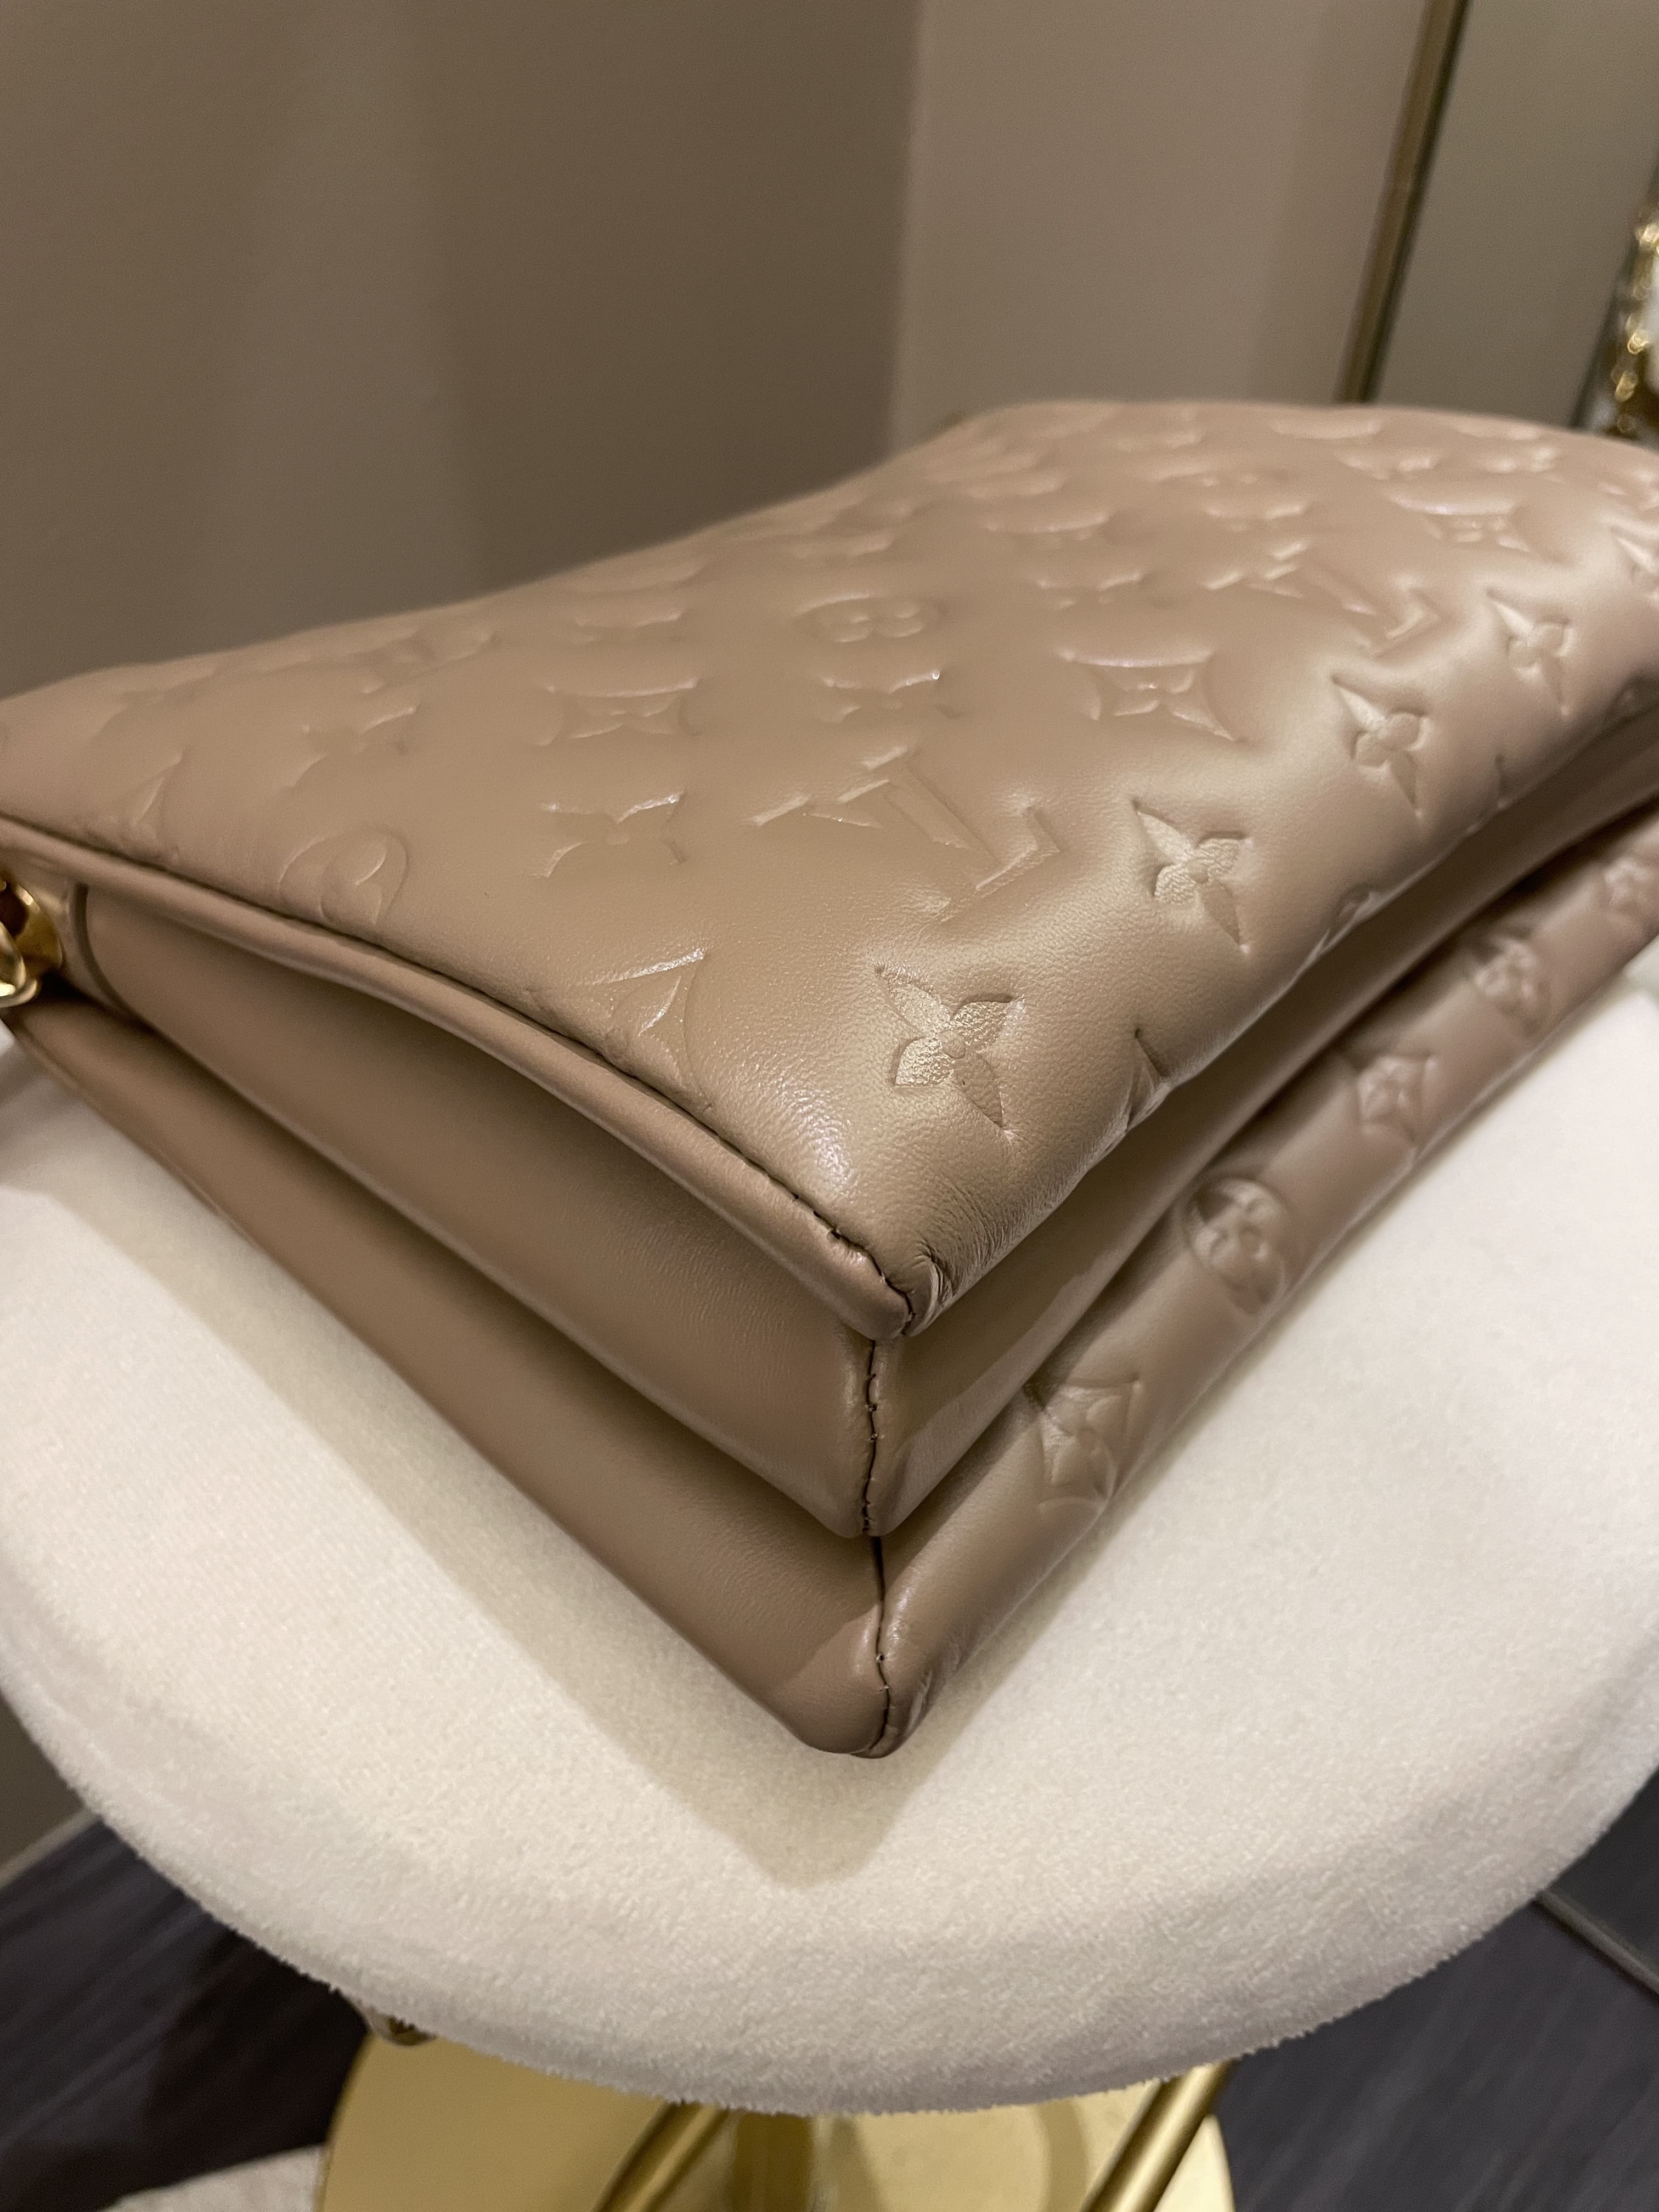 Louis Vuitton Coussin PM in Taupe - Updated Release Review 